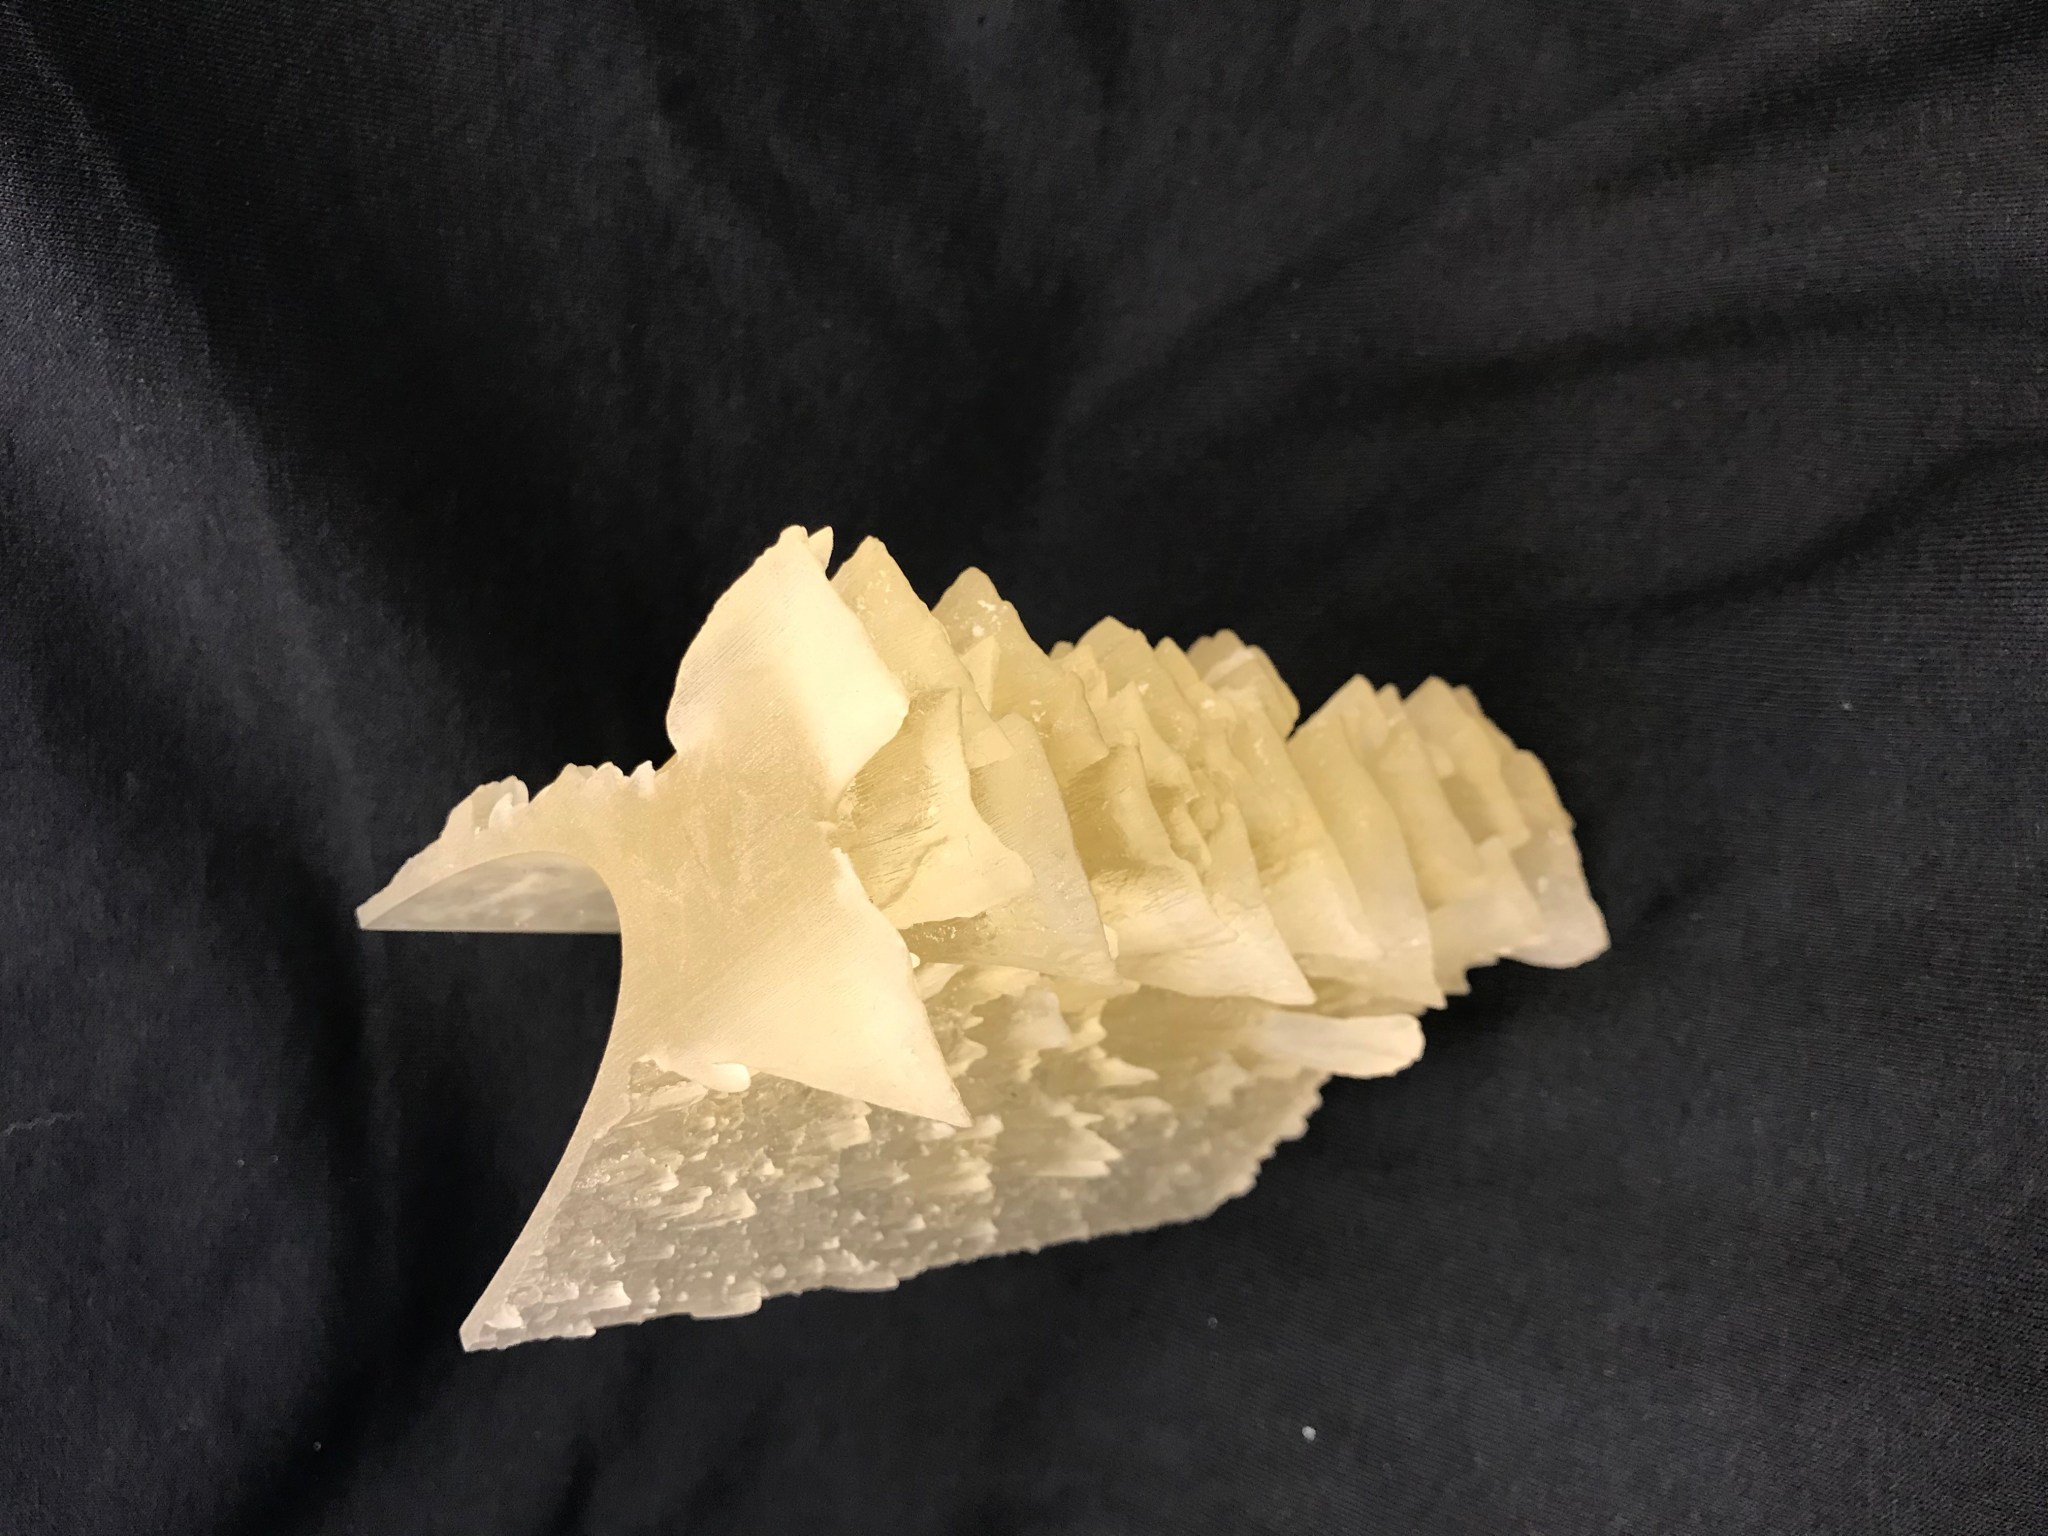 Complex ice shapes produced by a 3D printer.